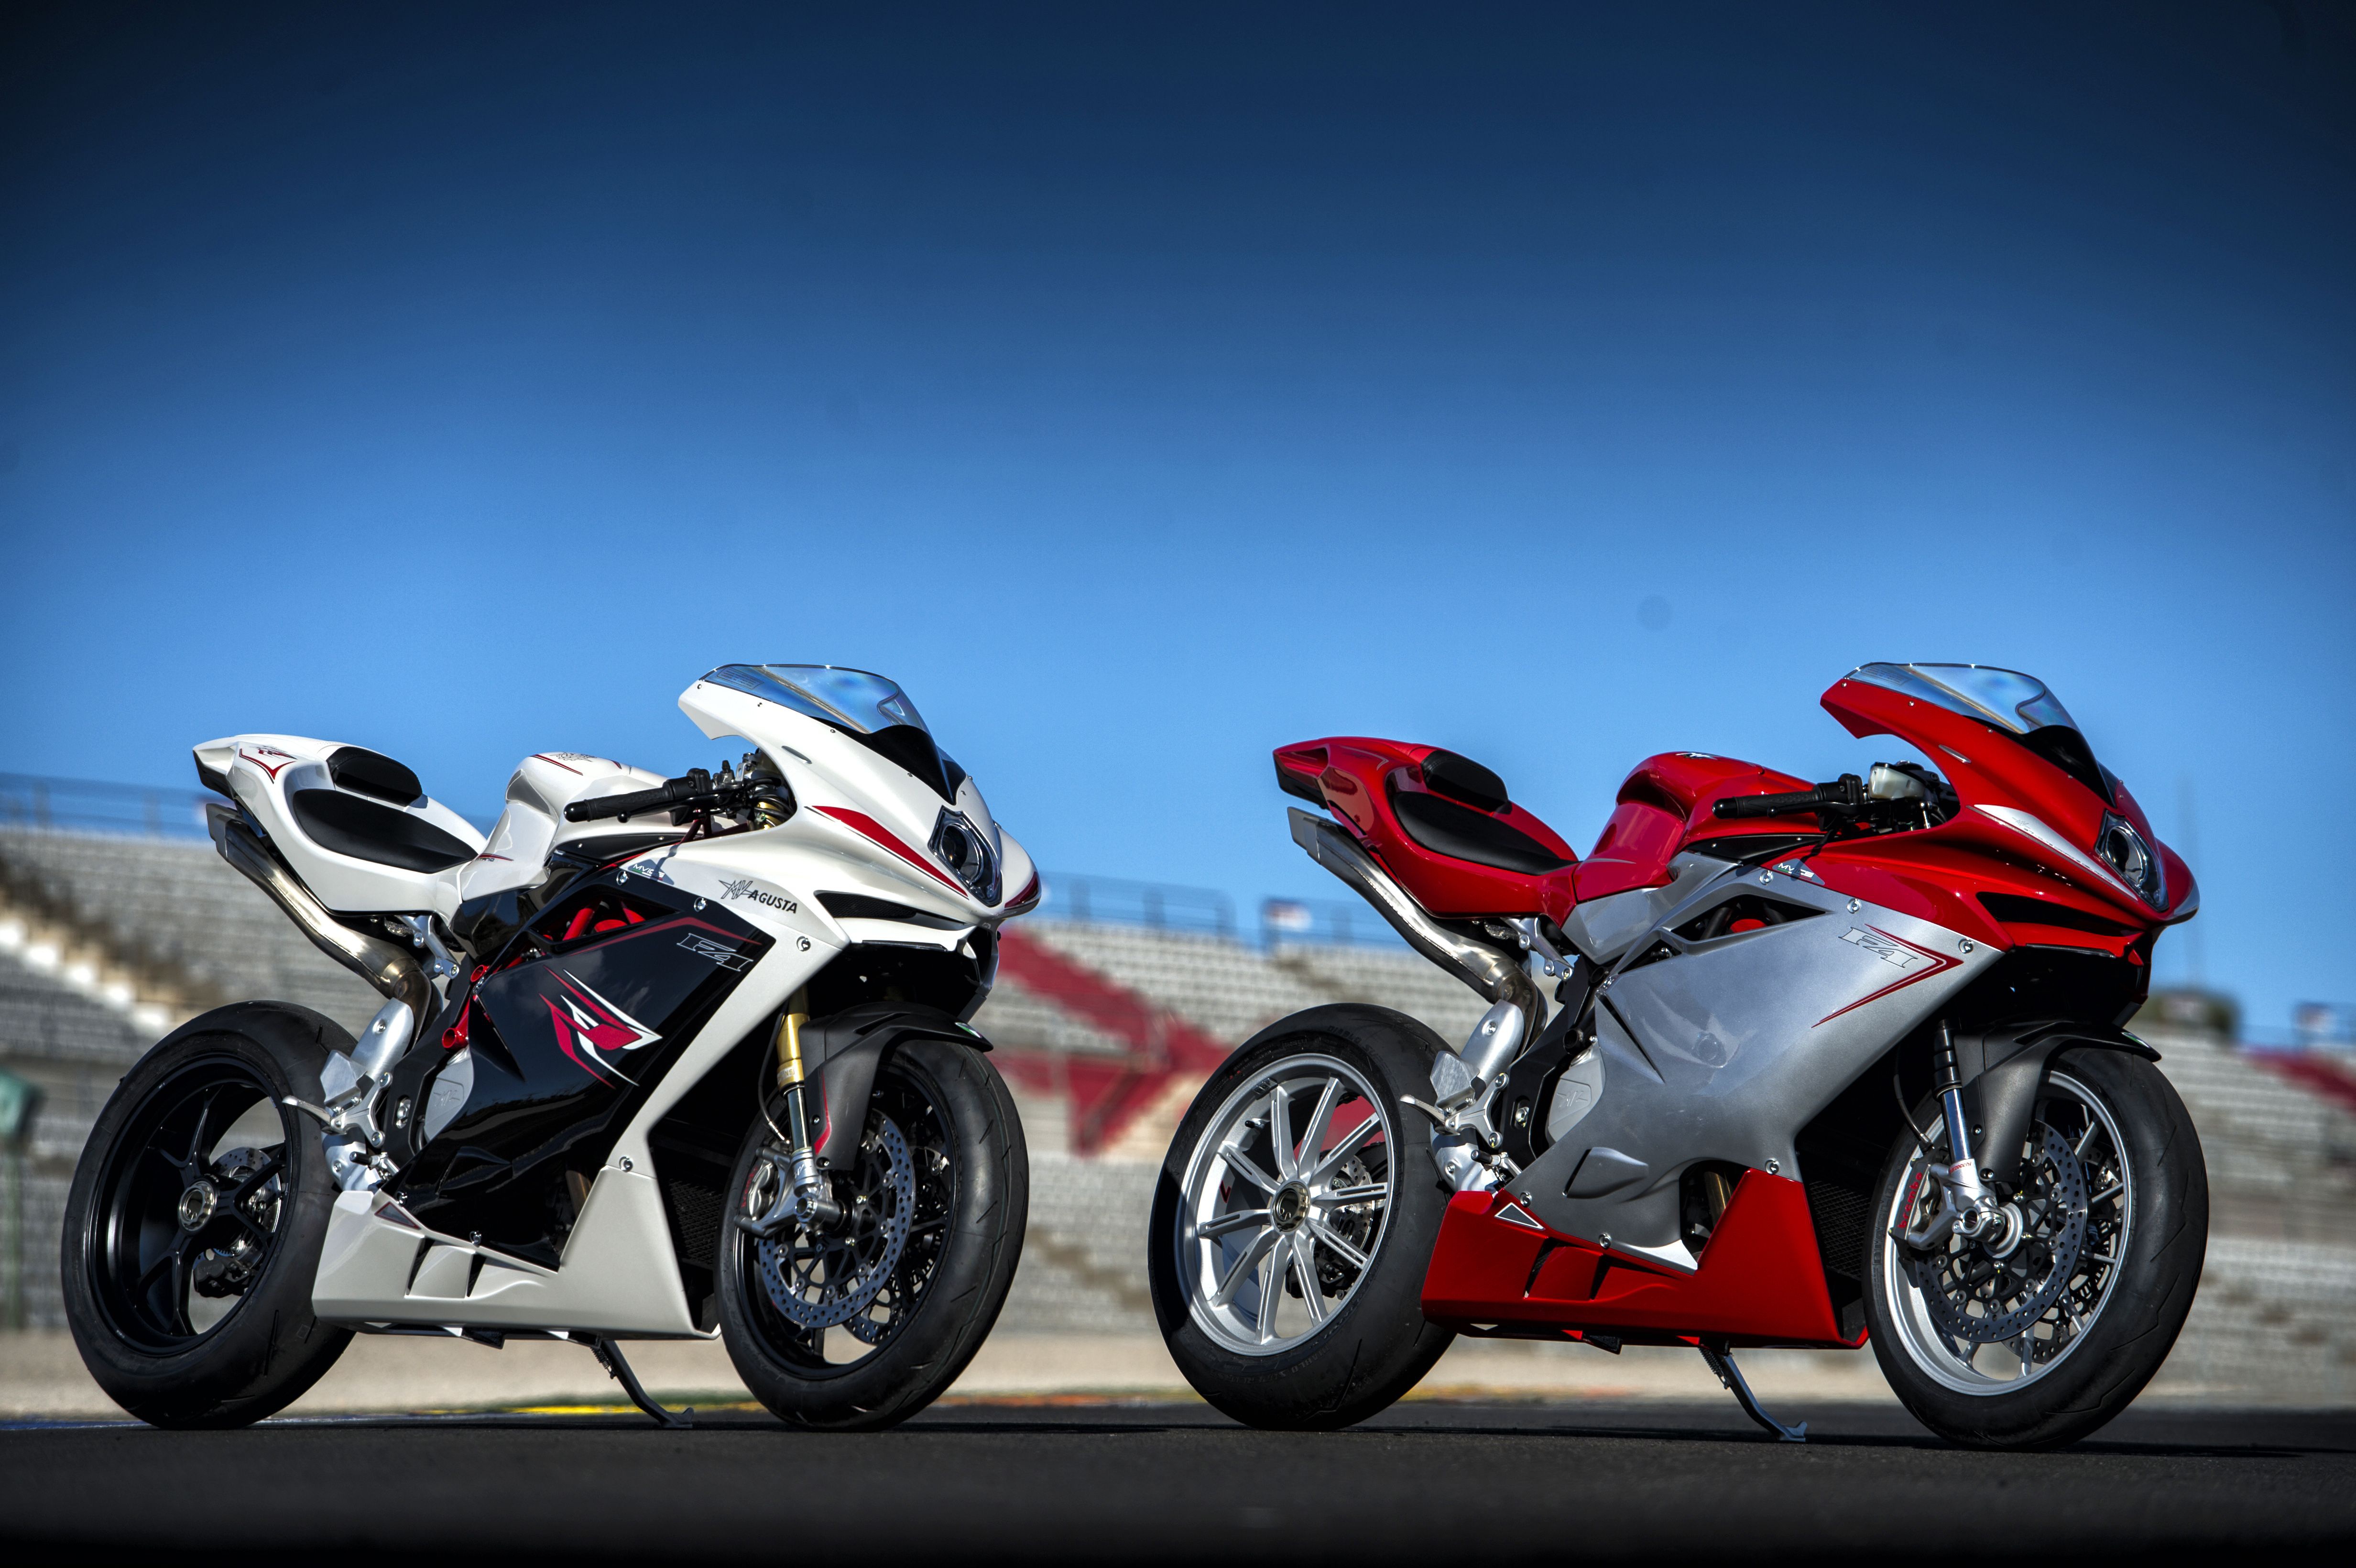 PC Wallpapers mv agusta f4, vehicles, motorcycle